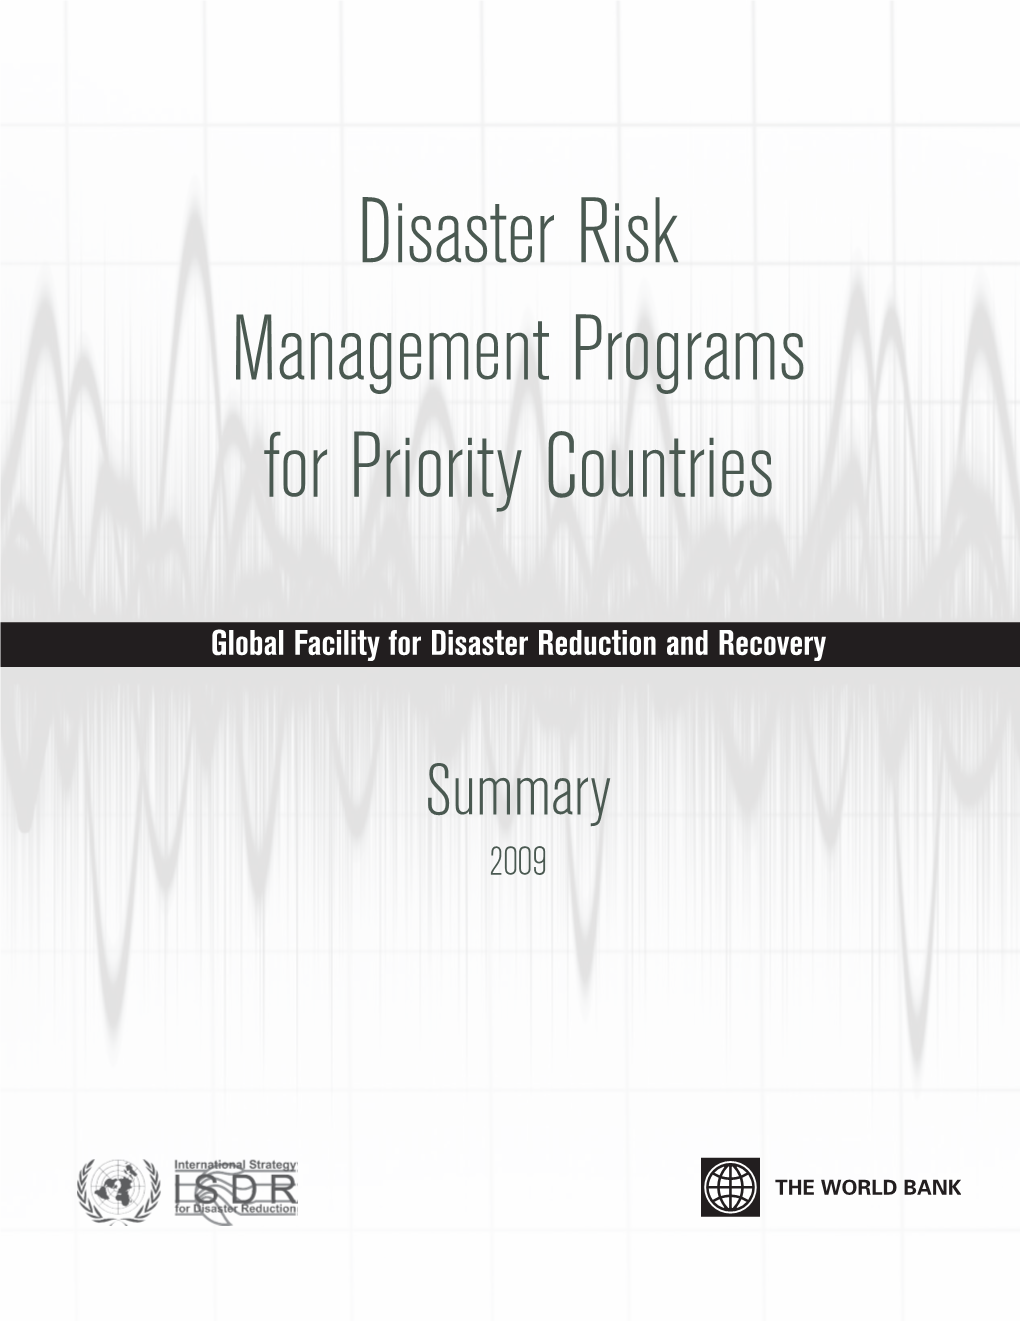 Disaster Risk Management Programs for Priority Countries